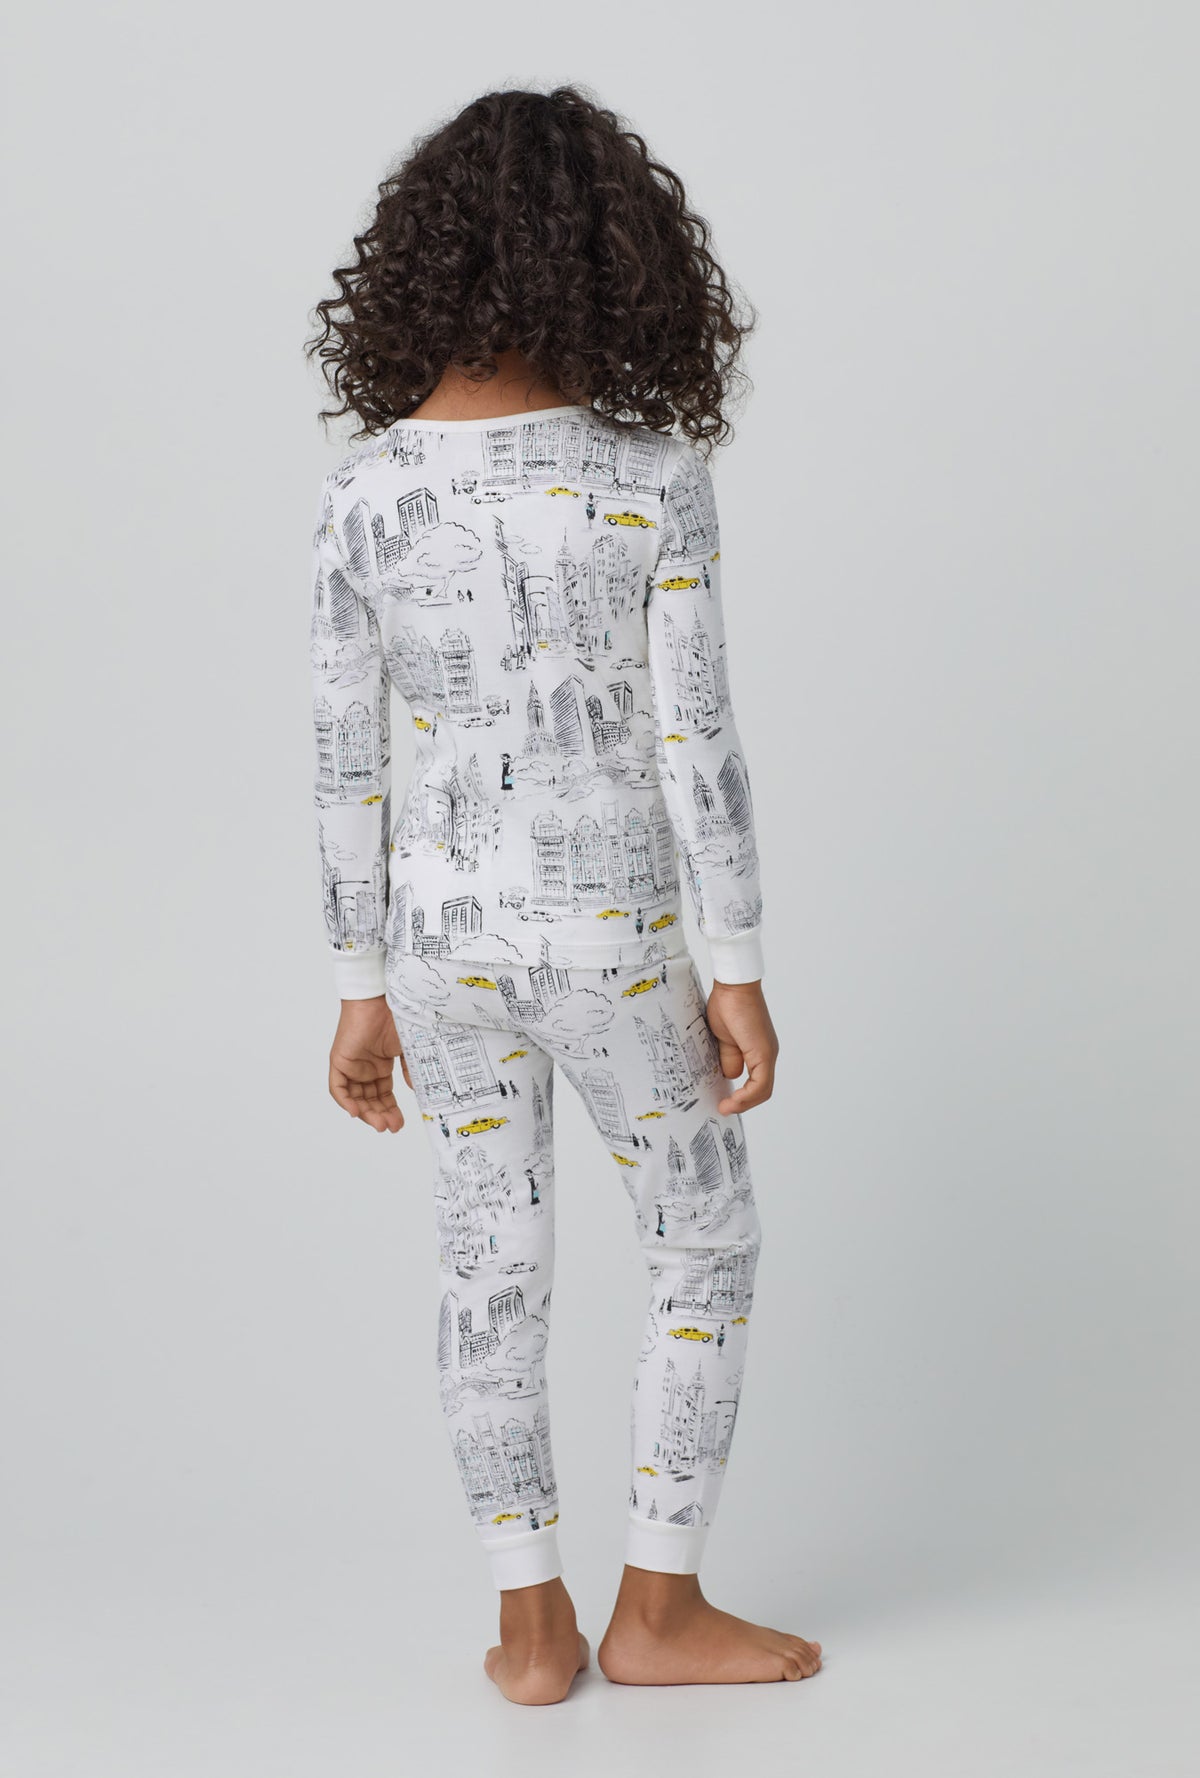 A kid wearing whiite long sleeve stretch jersey kids pj set with city that never sleeps print.